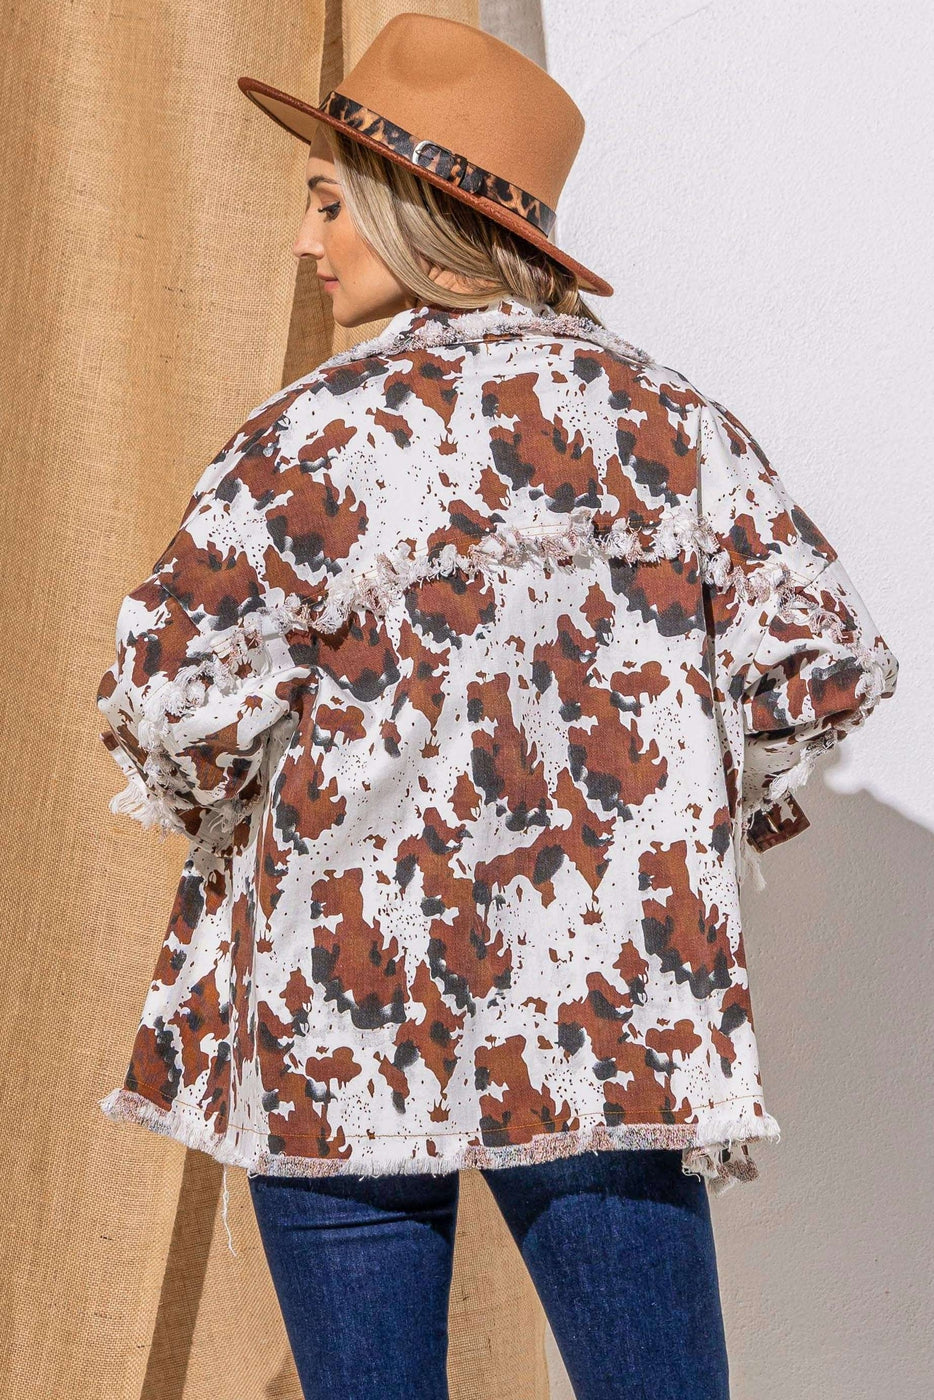 Cow Print Distressed Loose Jacket Cowgirl Women Jacket